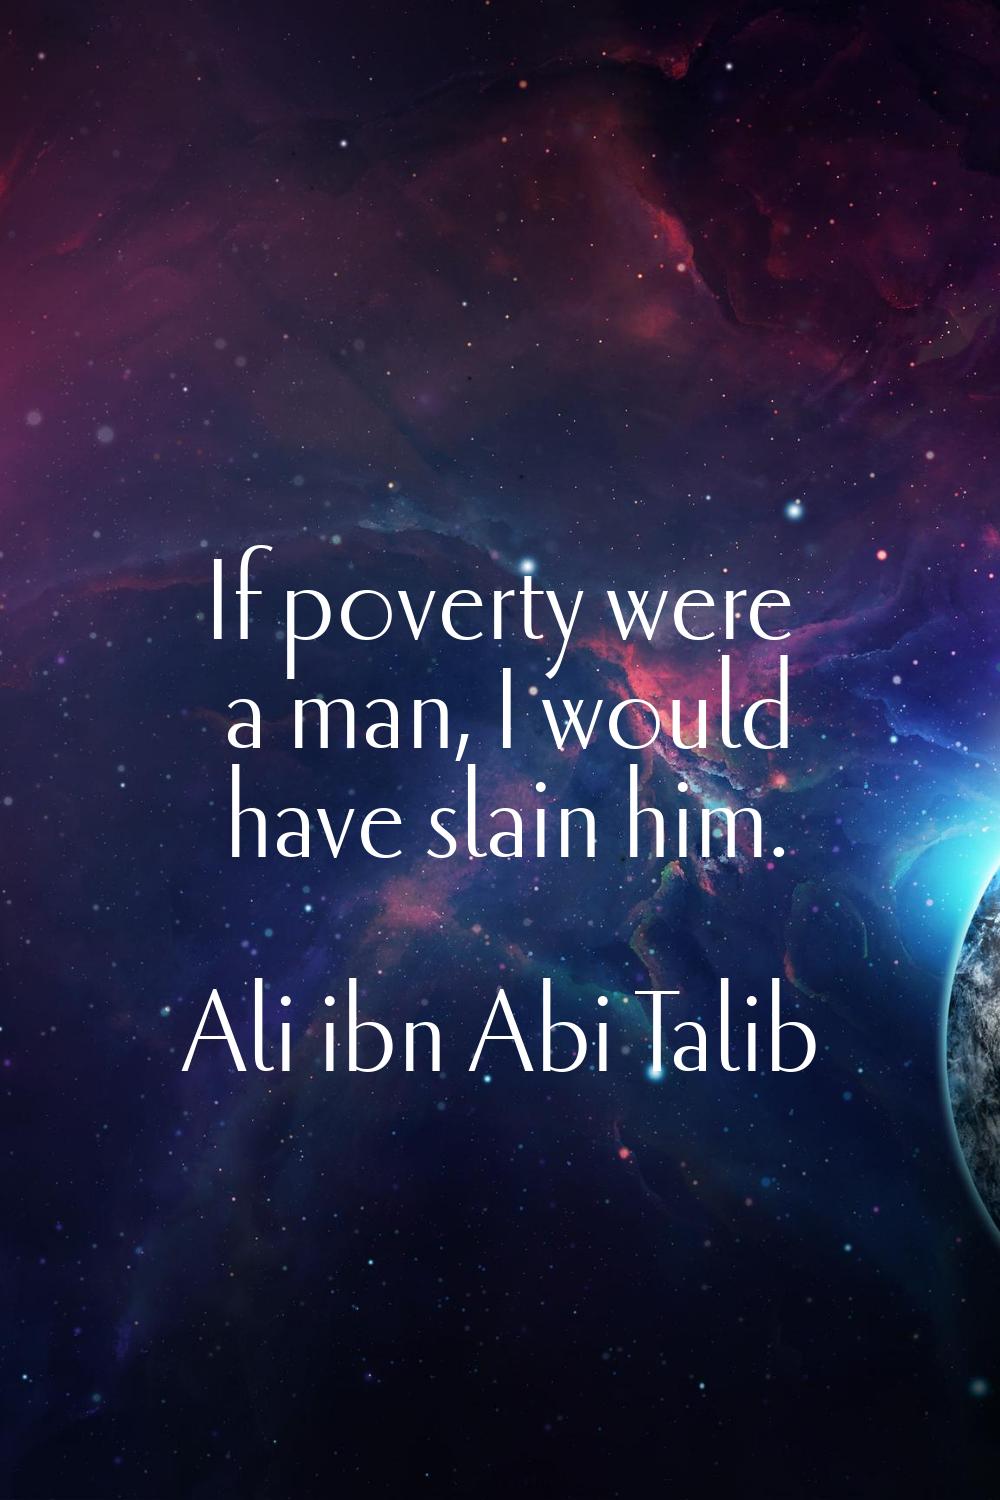 If poverty were a man, I would have slain him.